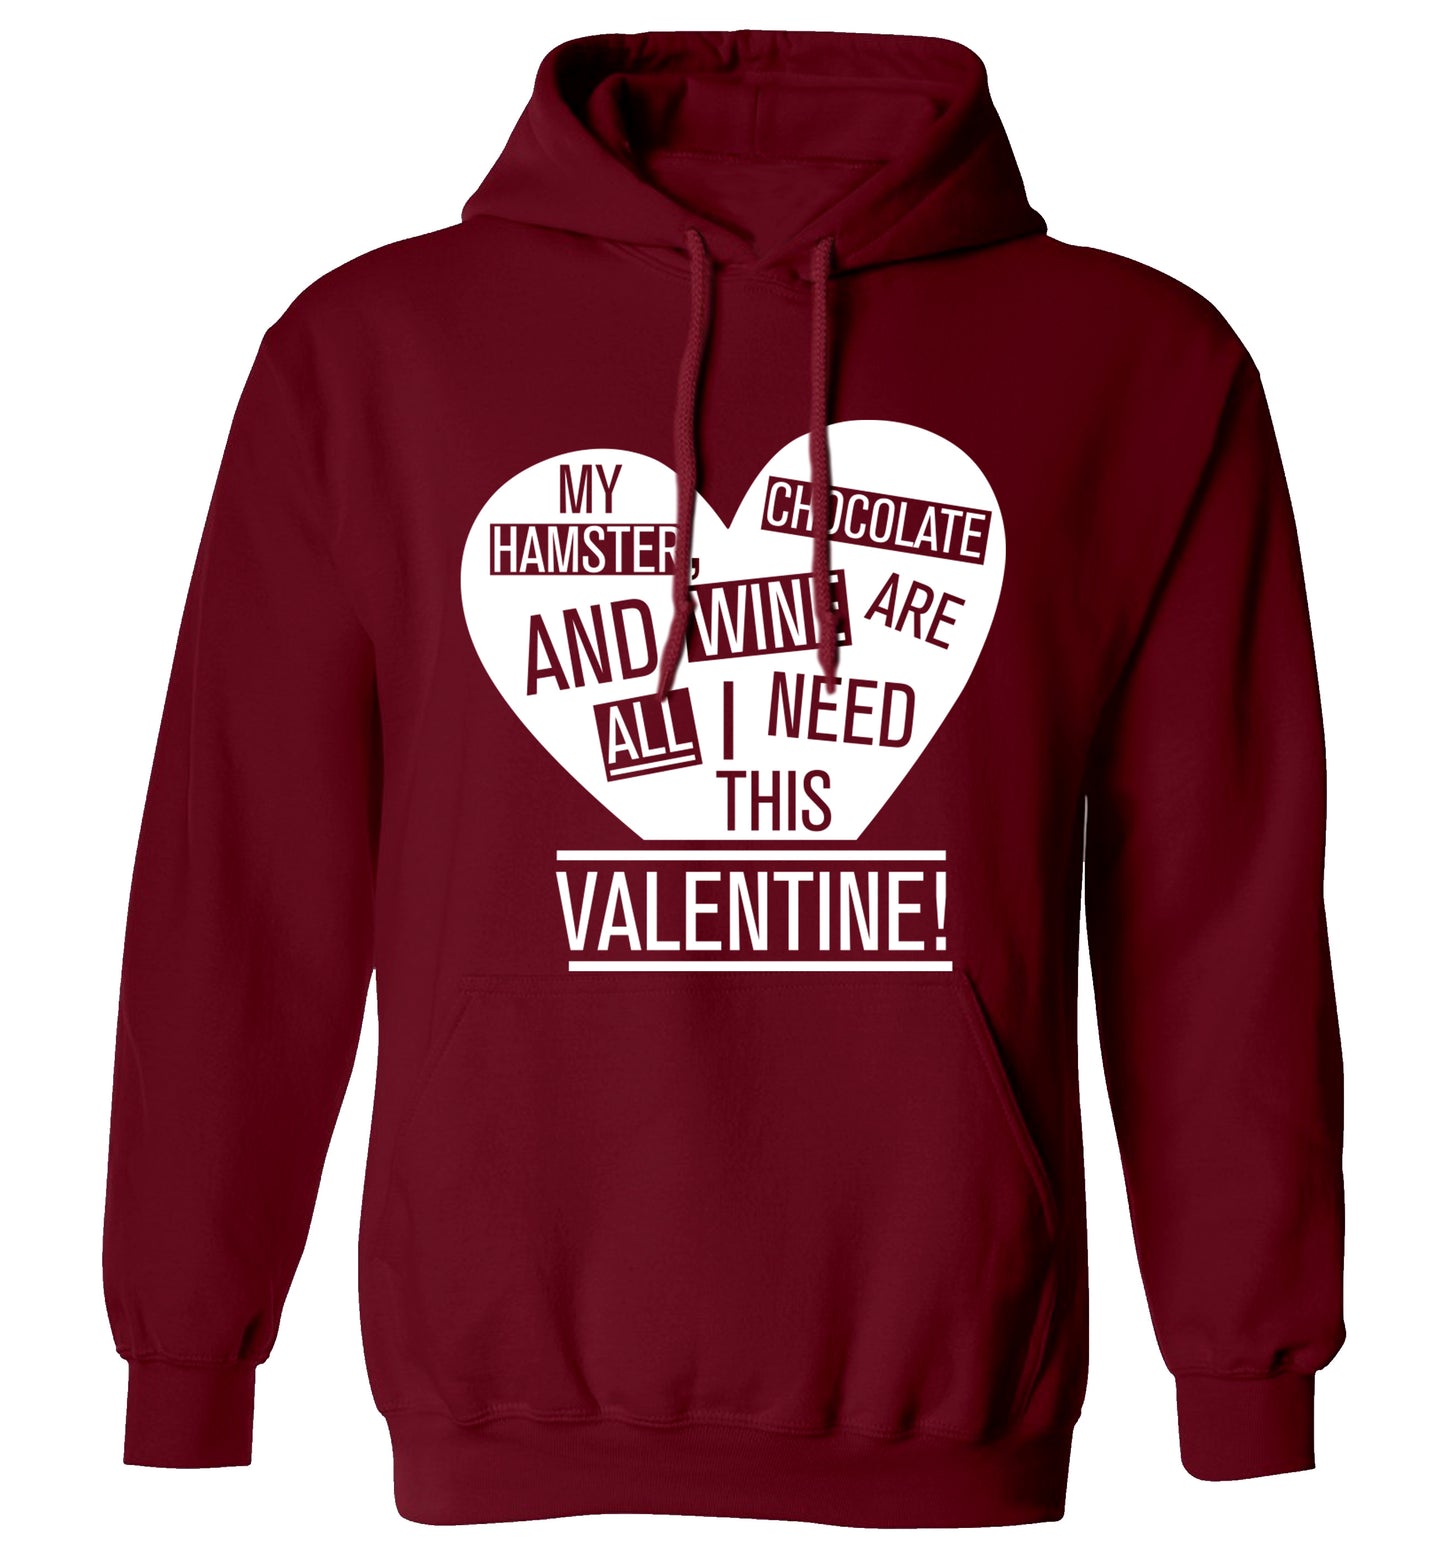 My hamster, chocolate and wine are all I need this valentine! adults unisex maroon hoodie 2XL